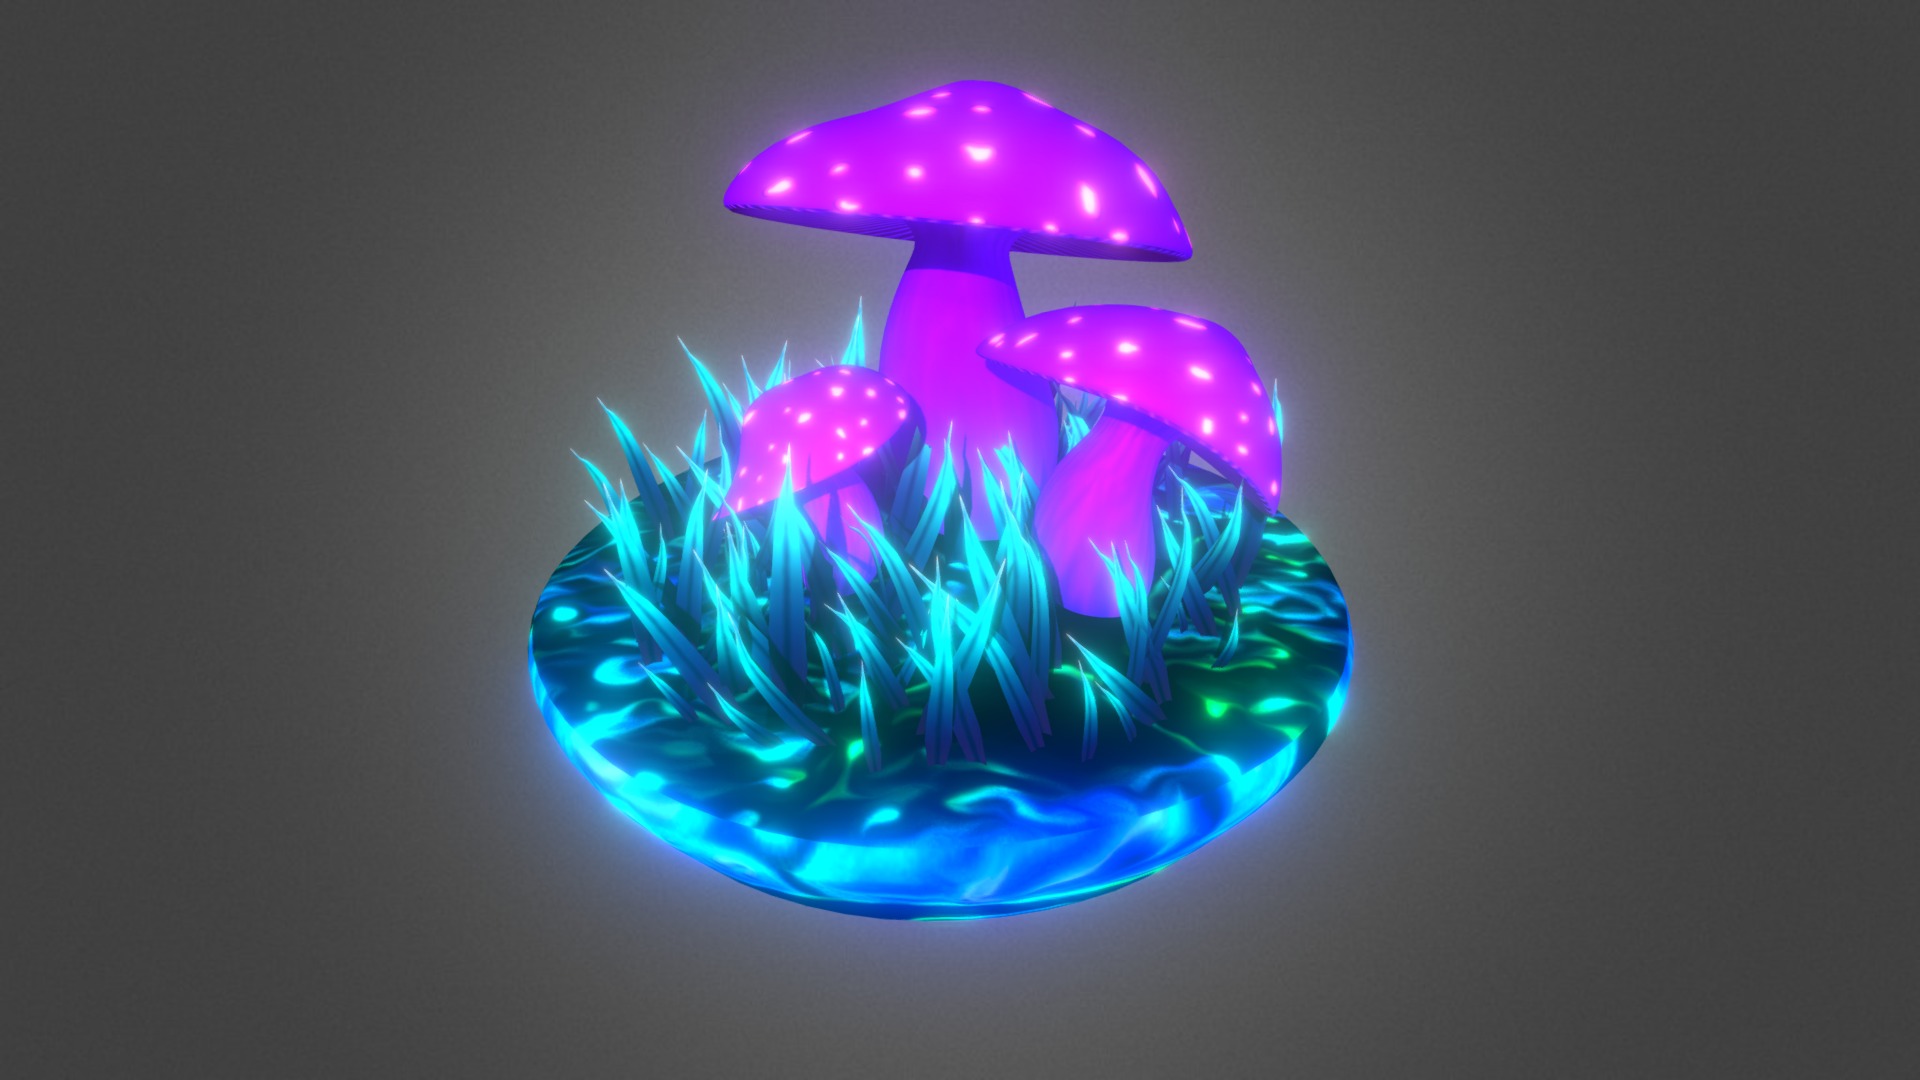 3D model Mushrooms 1 - This is a 3D model of the Mushrooms 1. The 3D model is about a colorful glass orb.